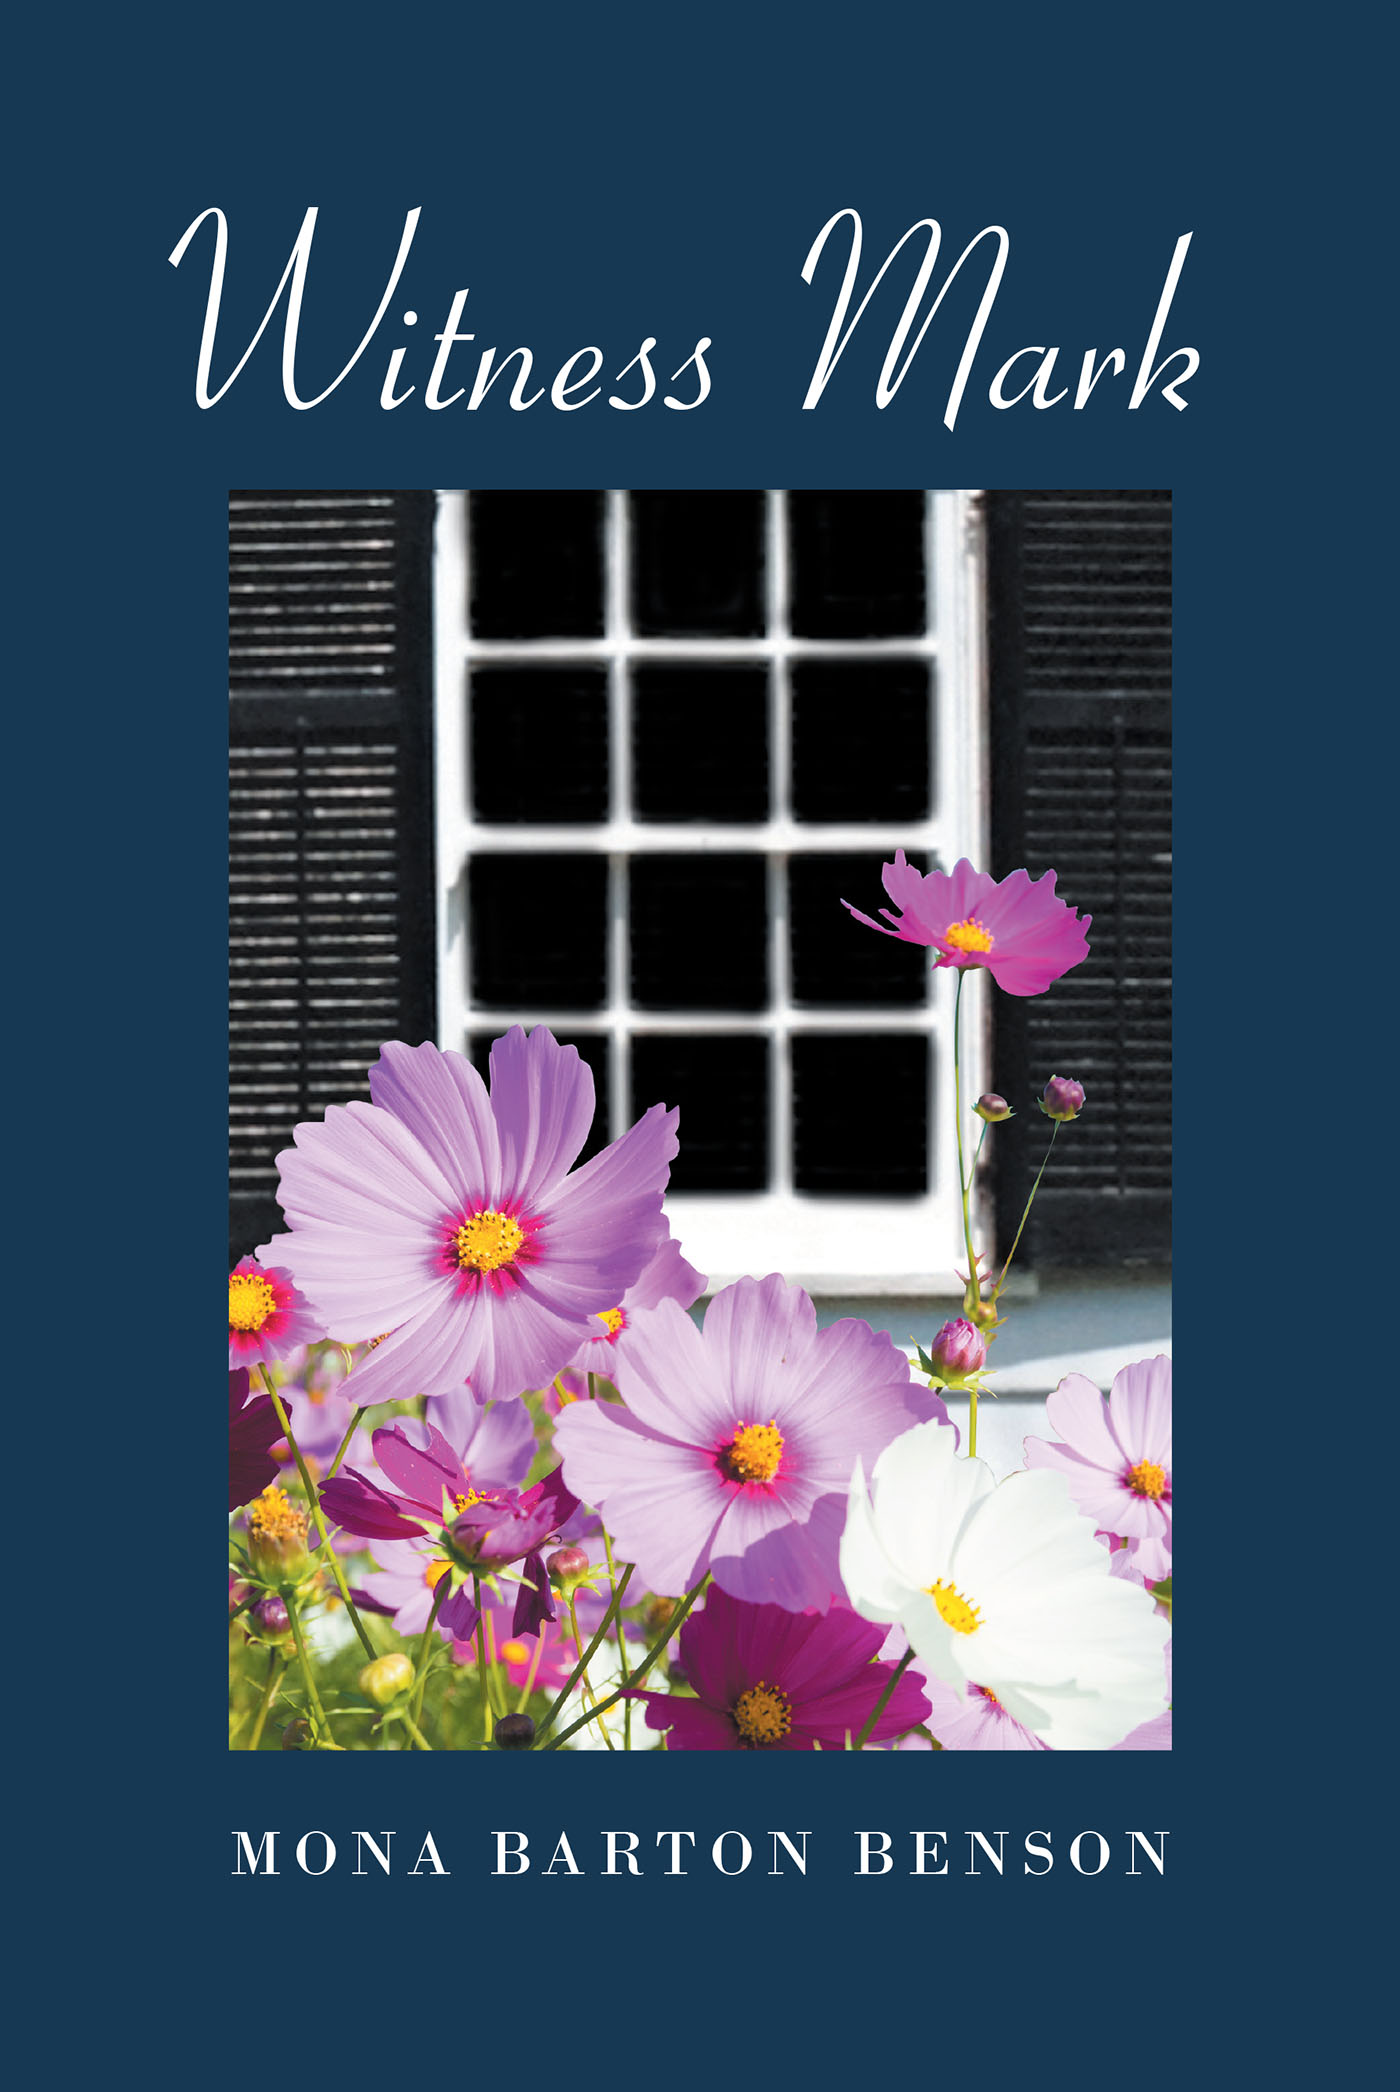 Author Mona Barton Benson’s New Book, "Witness Mark," is a Fictional Tale Based on True Events That Follows the Fascinating & Courageous Life of the Author's Grandmother